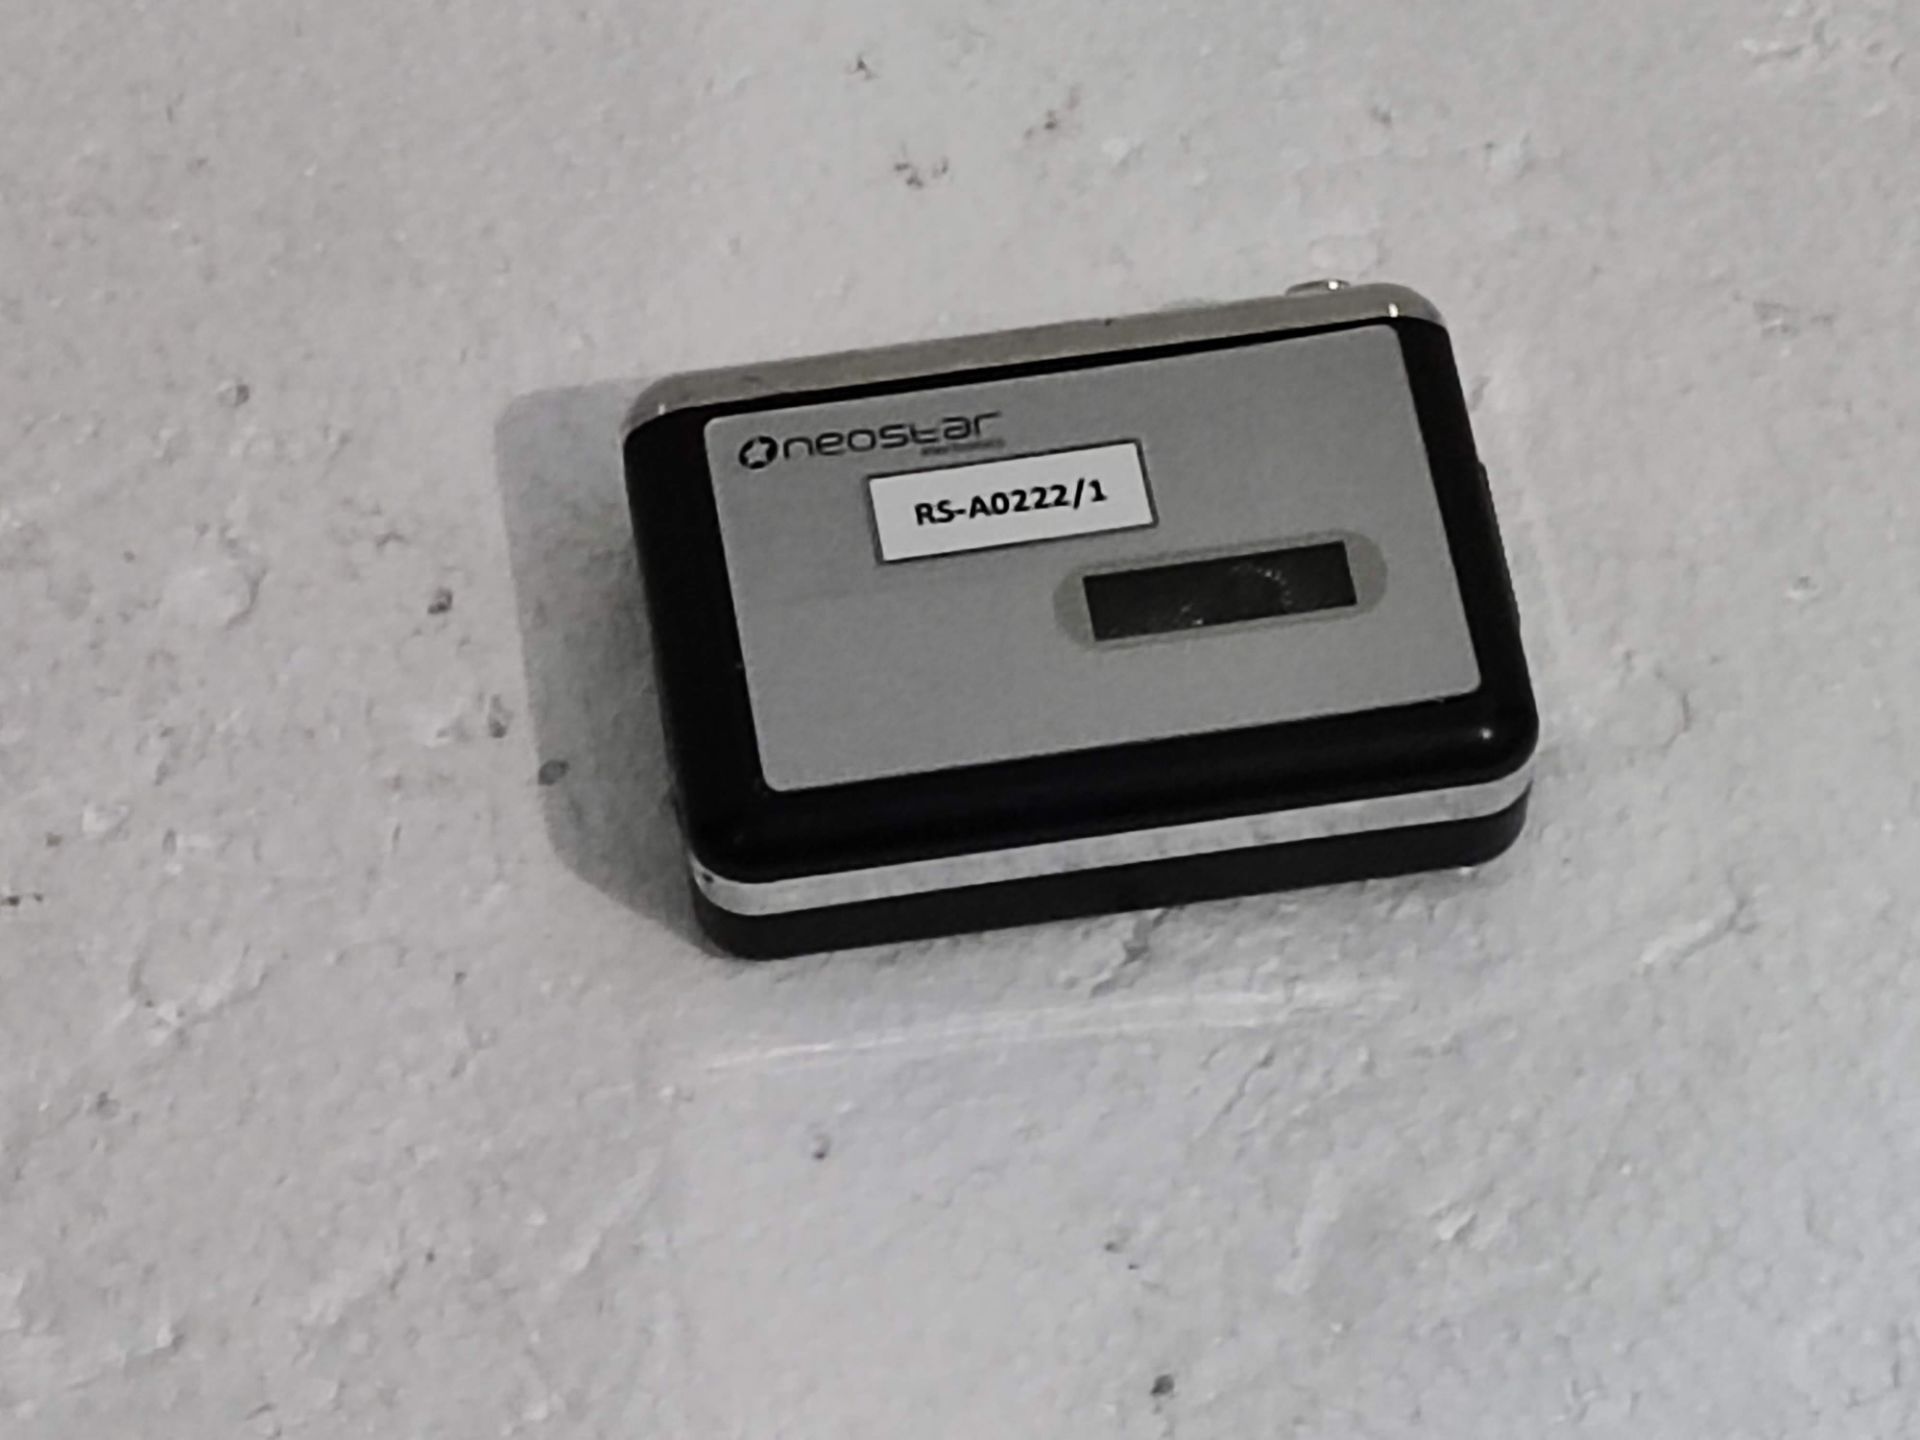 Neostar Cassette to MP3 Converter (RS-A0222/1)